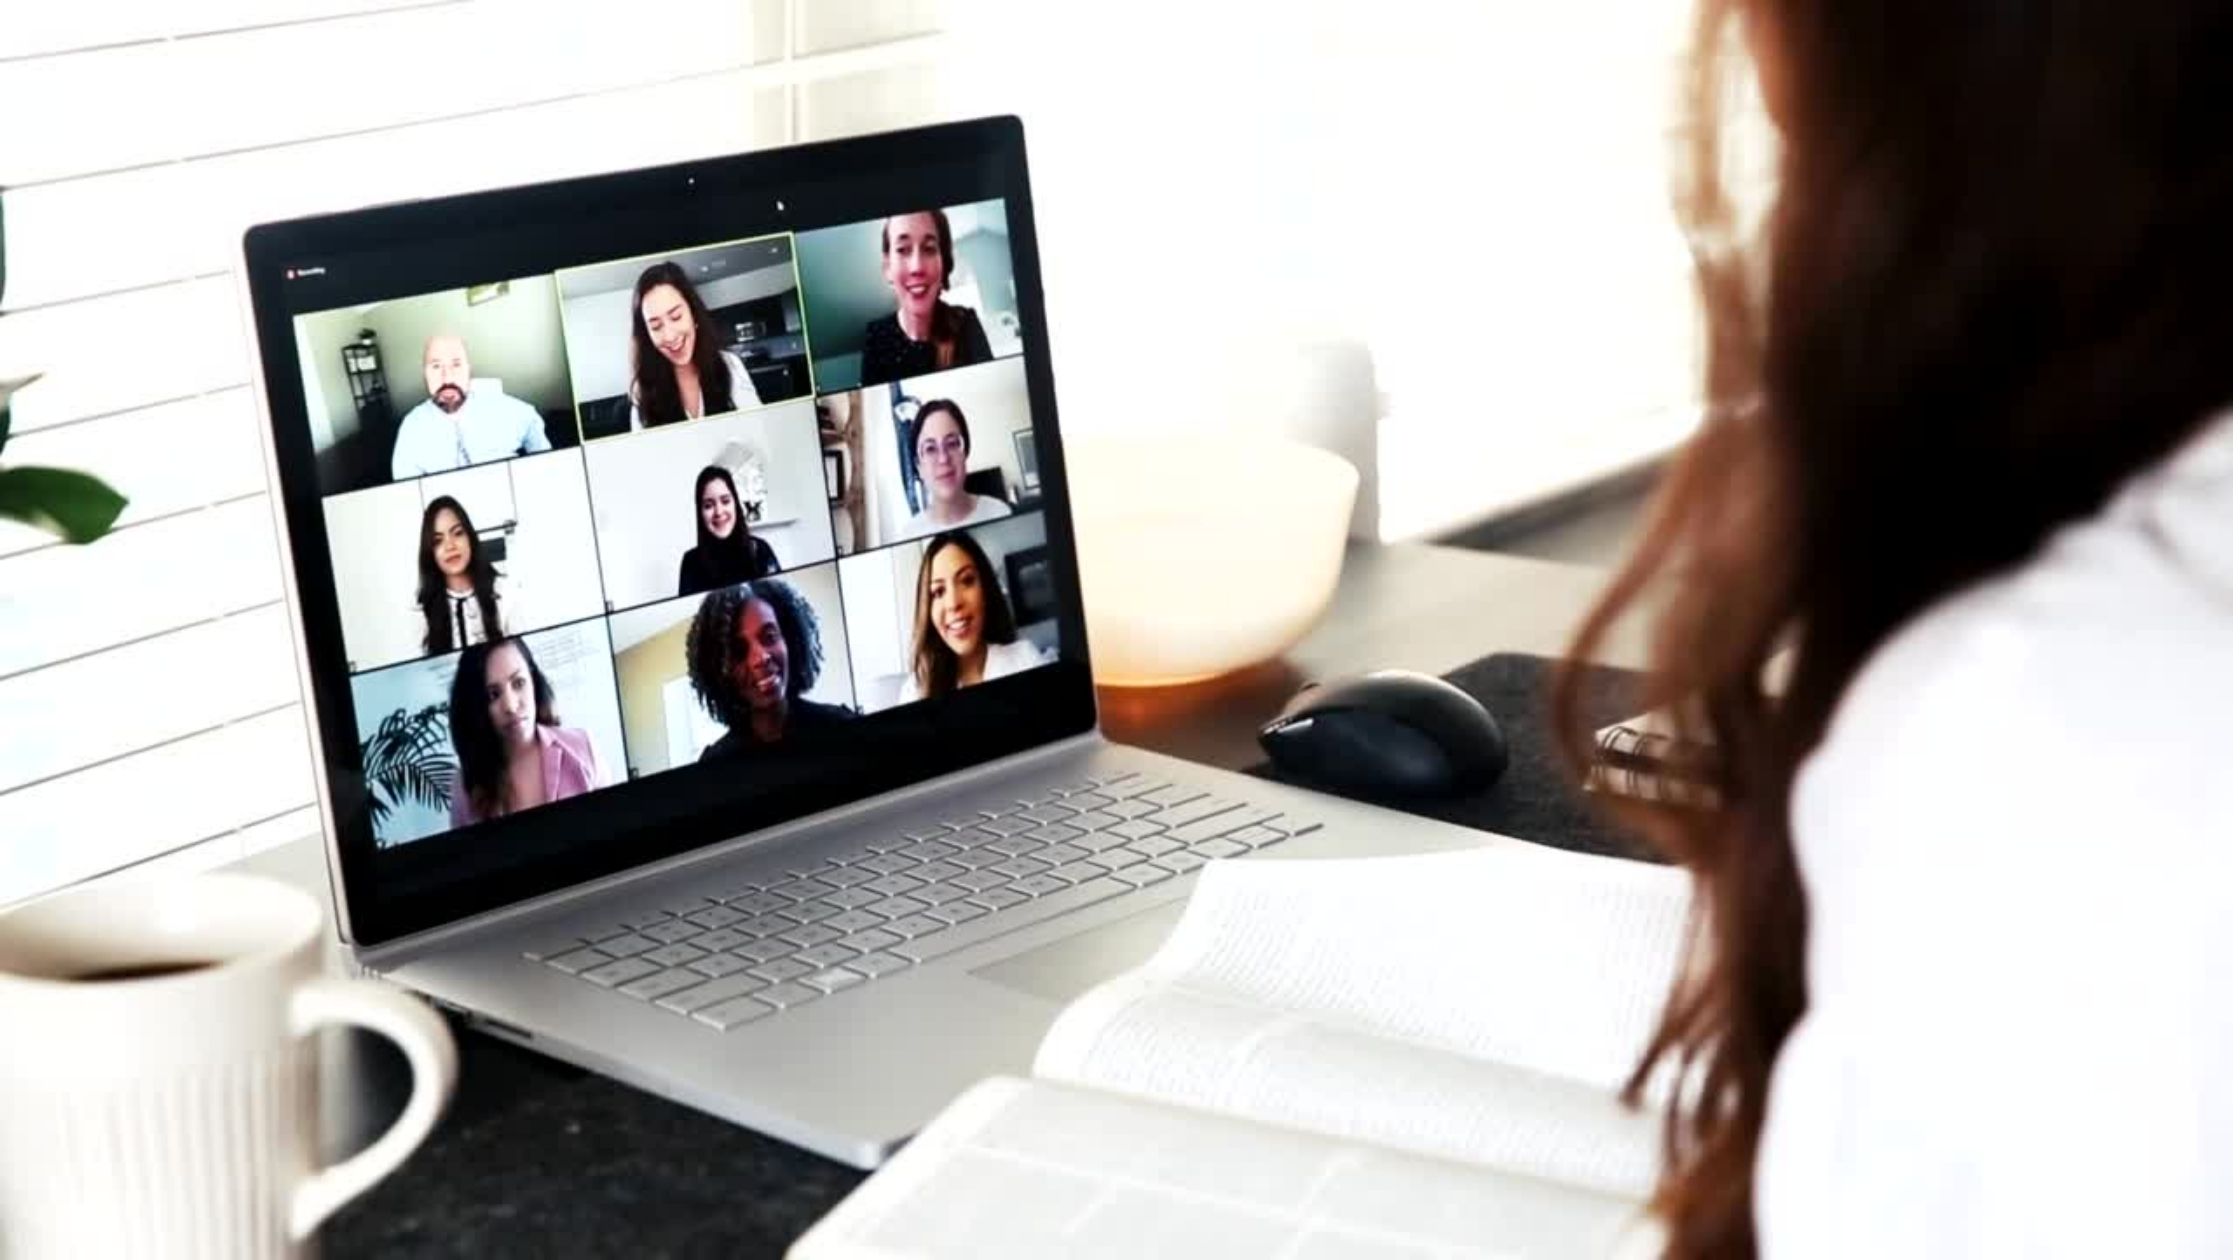 3 Reasons Why Online Groups are Great for Your Church